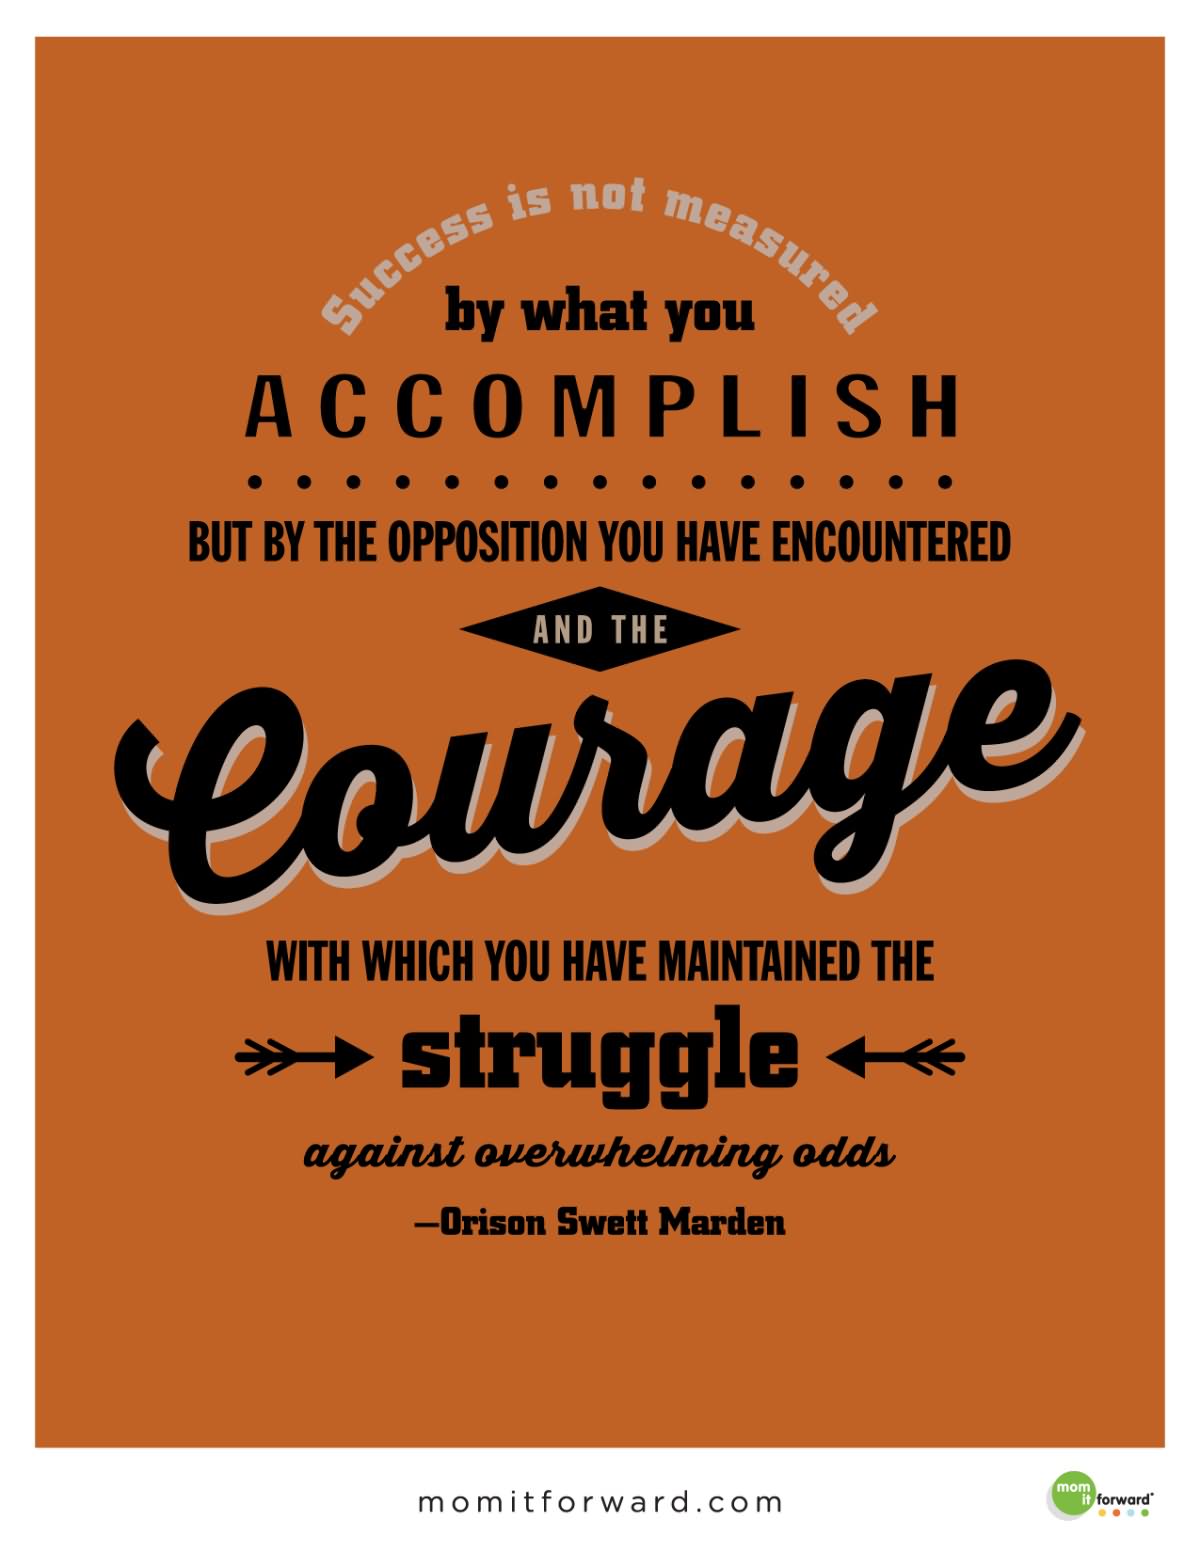 Success is not measured by what you accomplish, but by the opposition you have encountered, and the courage with which you have maintained the struggle against overwhelming odds  - Orison Swett Marden